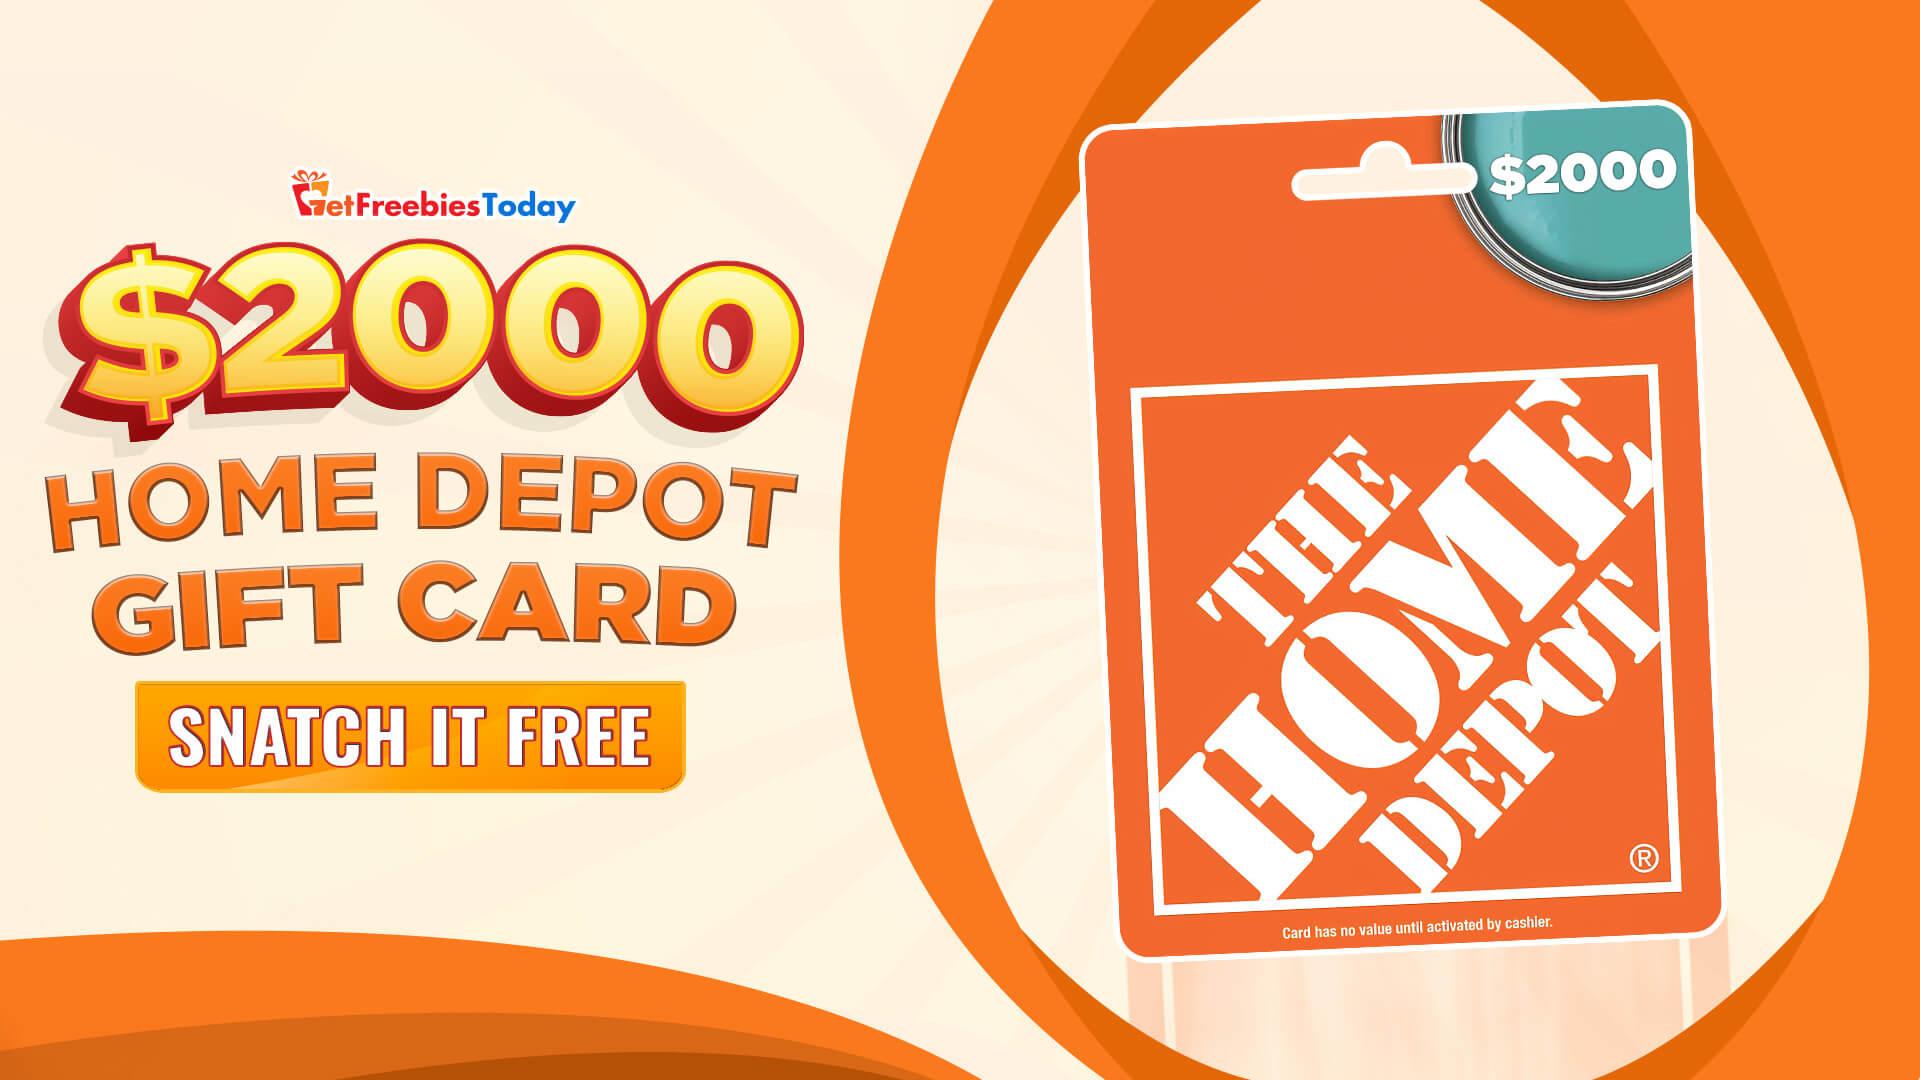 Snatch $2000 Home Depot Gift Card Rapidly